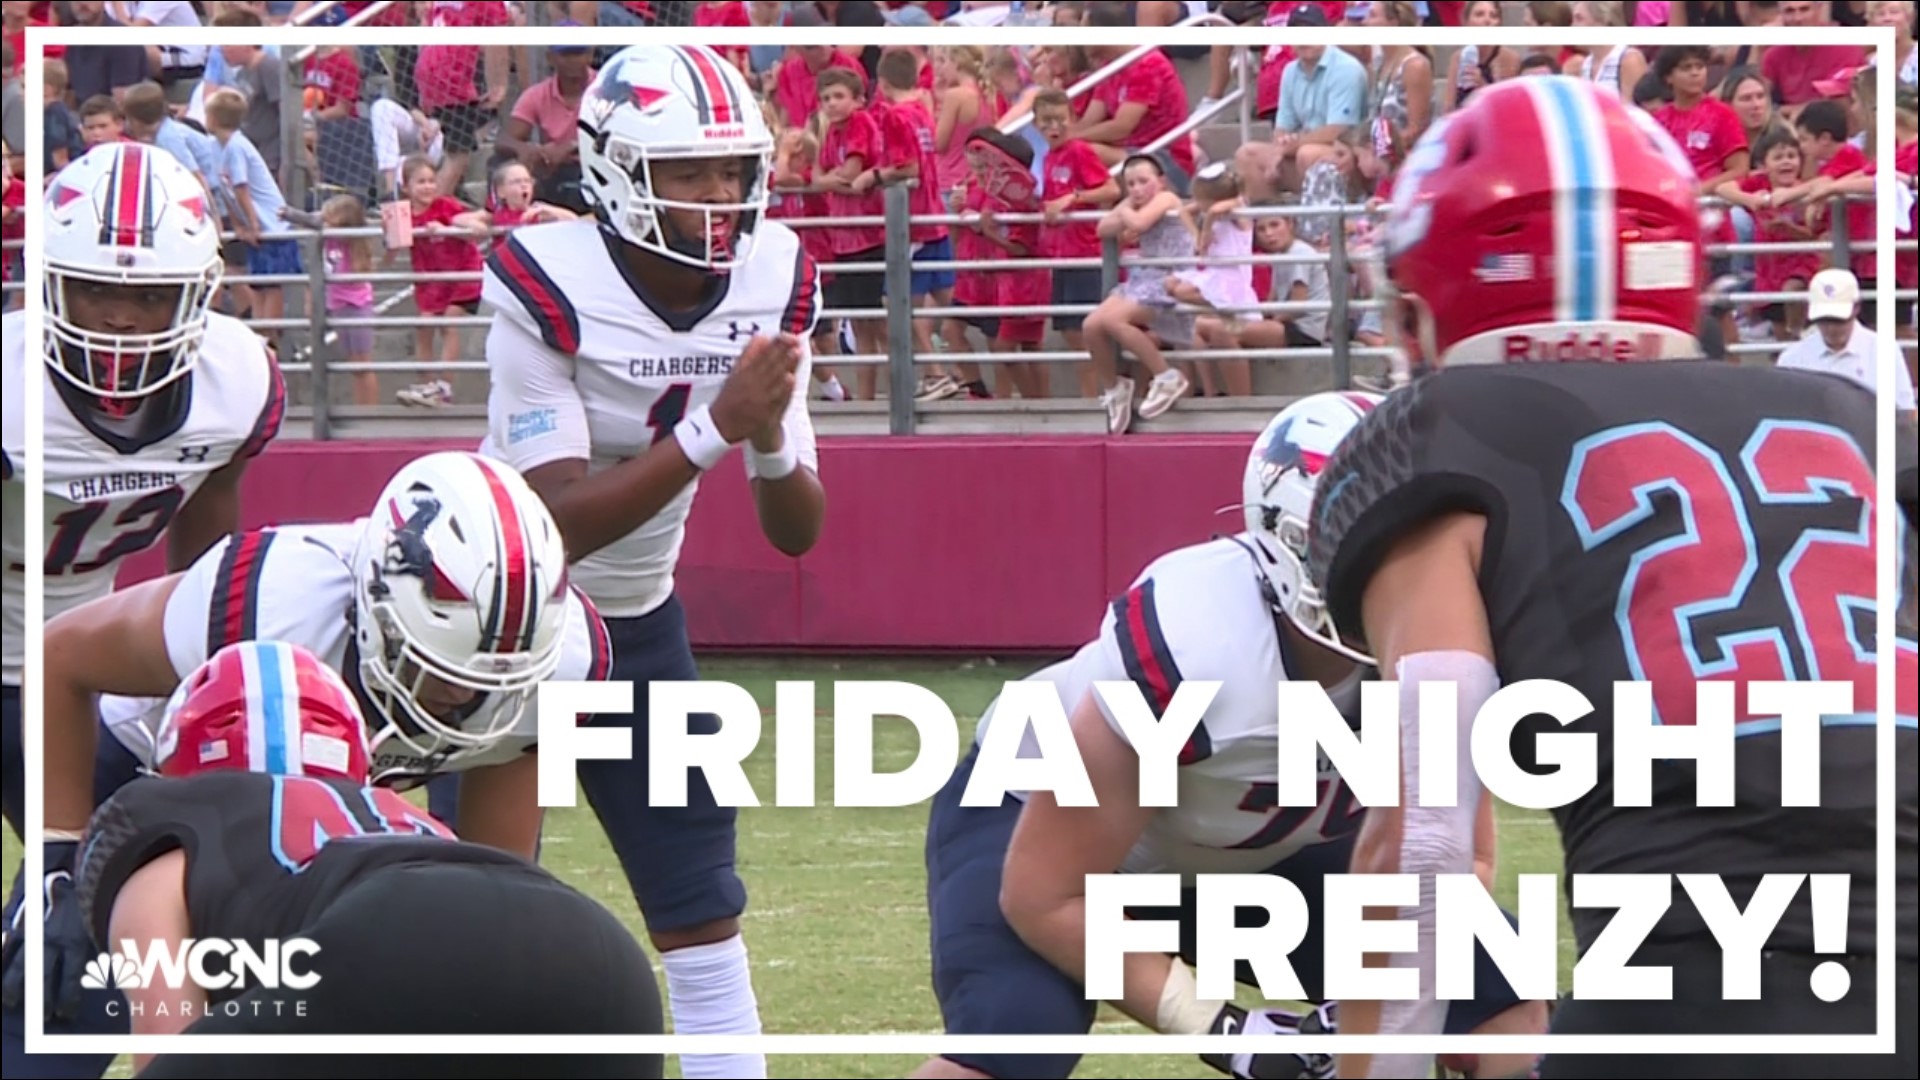 From the best touchdowns to incredible interceptions, Friday Night Frenzy gets you a closer look at the action on the turf!